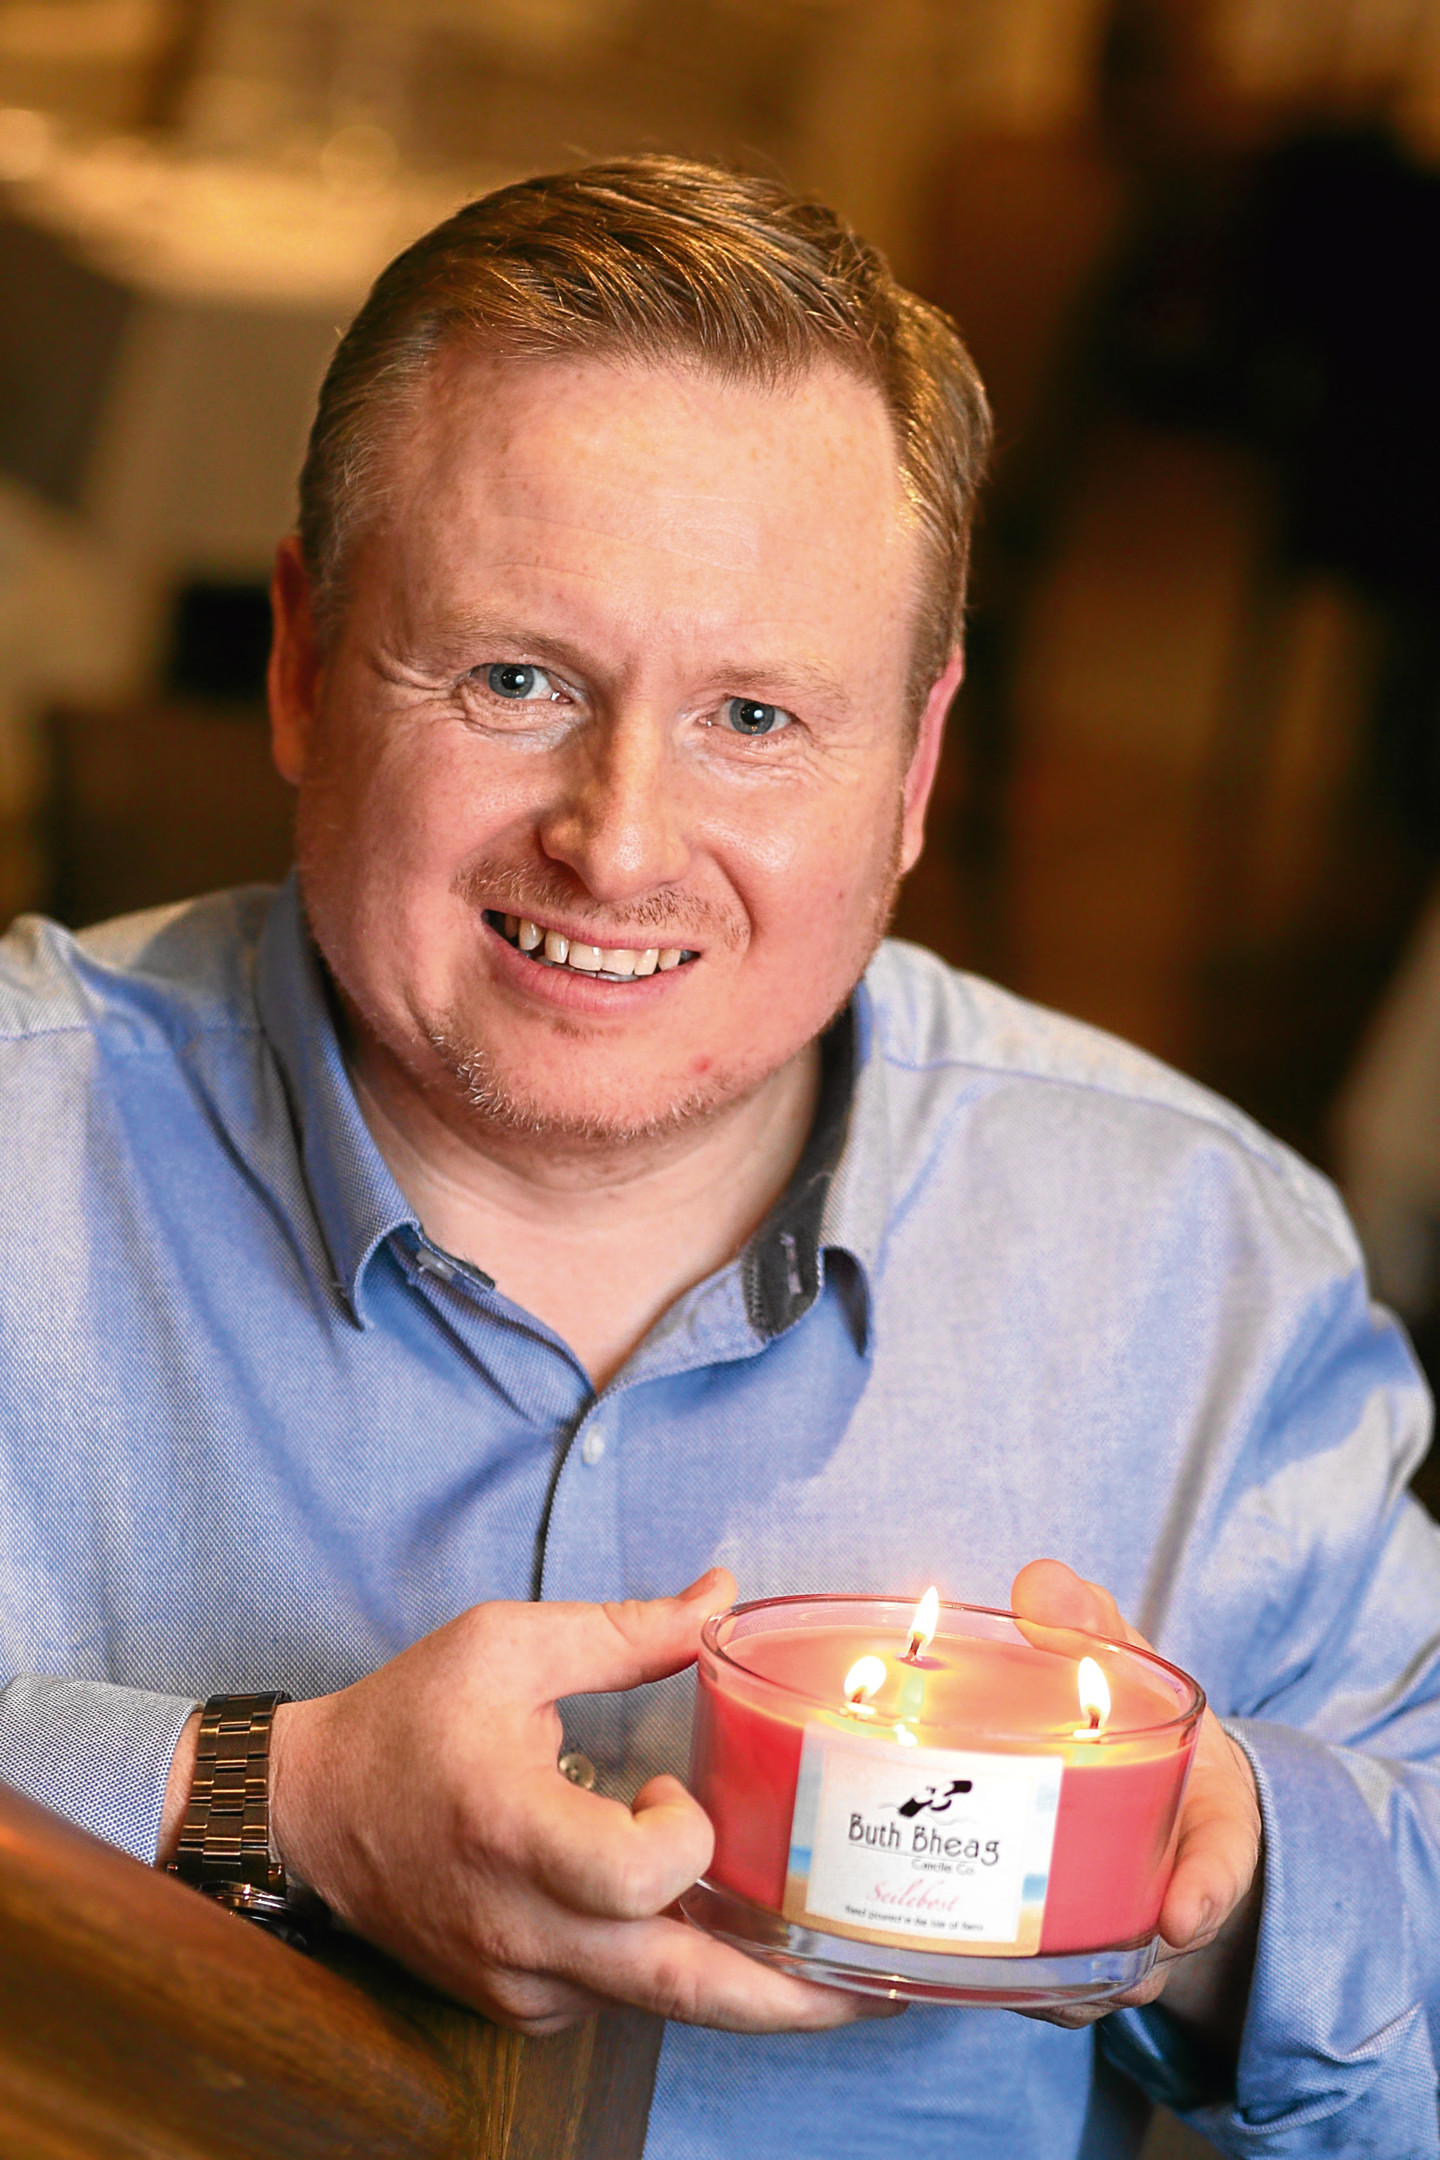 Entrepreneurial Spark virtual entrepreneurship course at the Kingsmills Hotel, Inverness. This pic: Jamie McGowan of Buth Bheag candle company